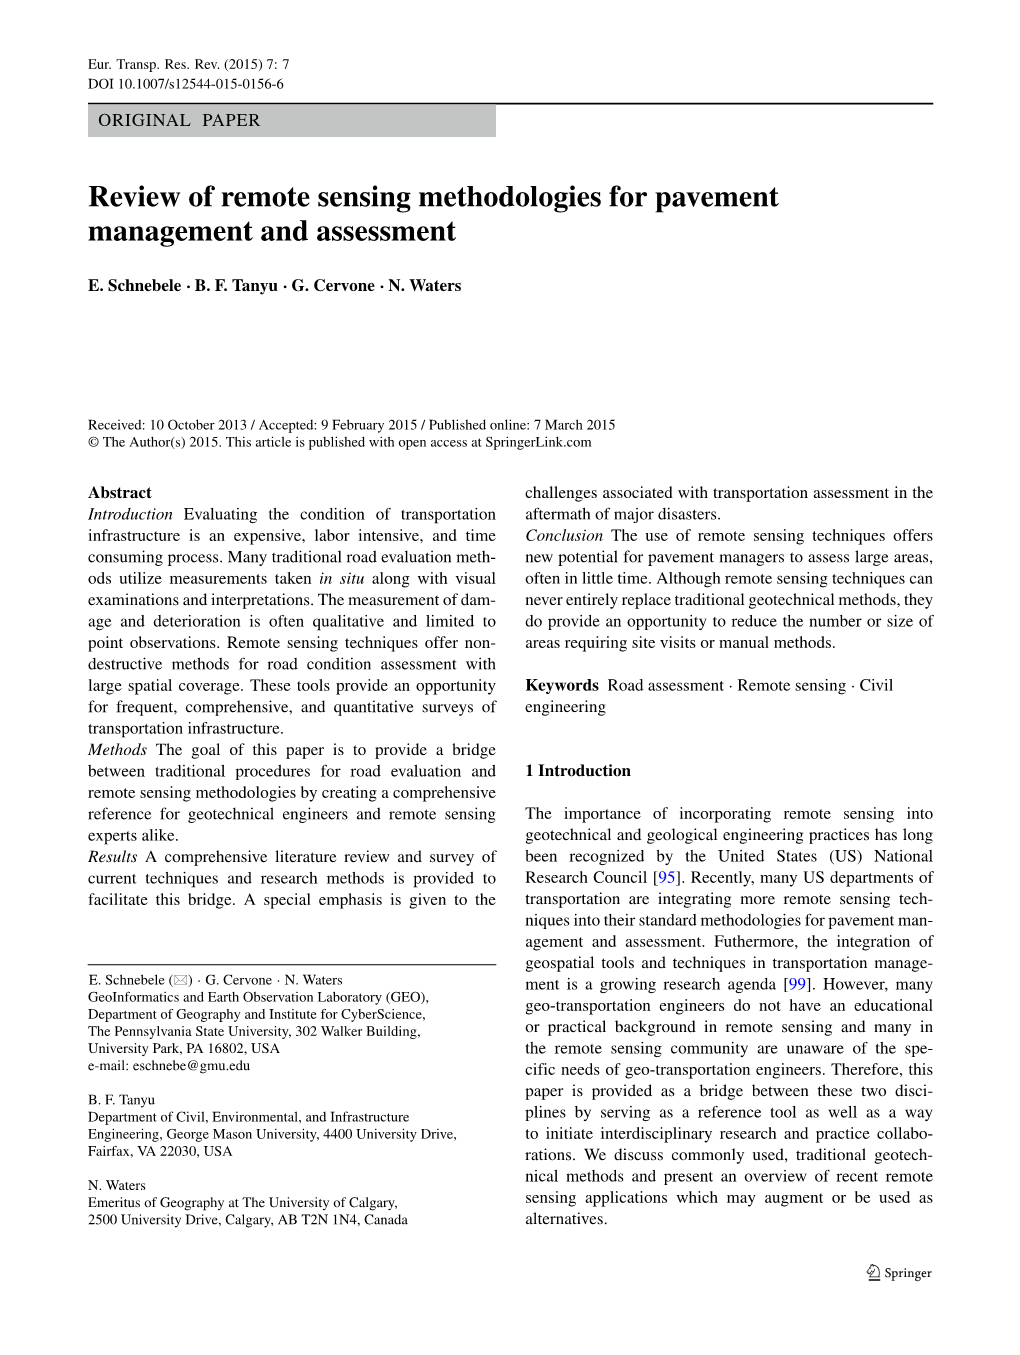 Review of Remote Sensing Methodologies for Pavement Management and Assessment